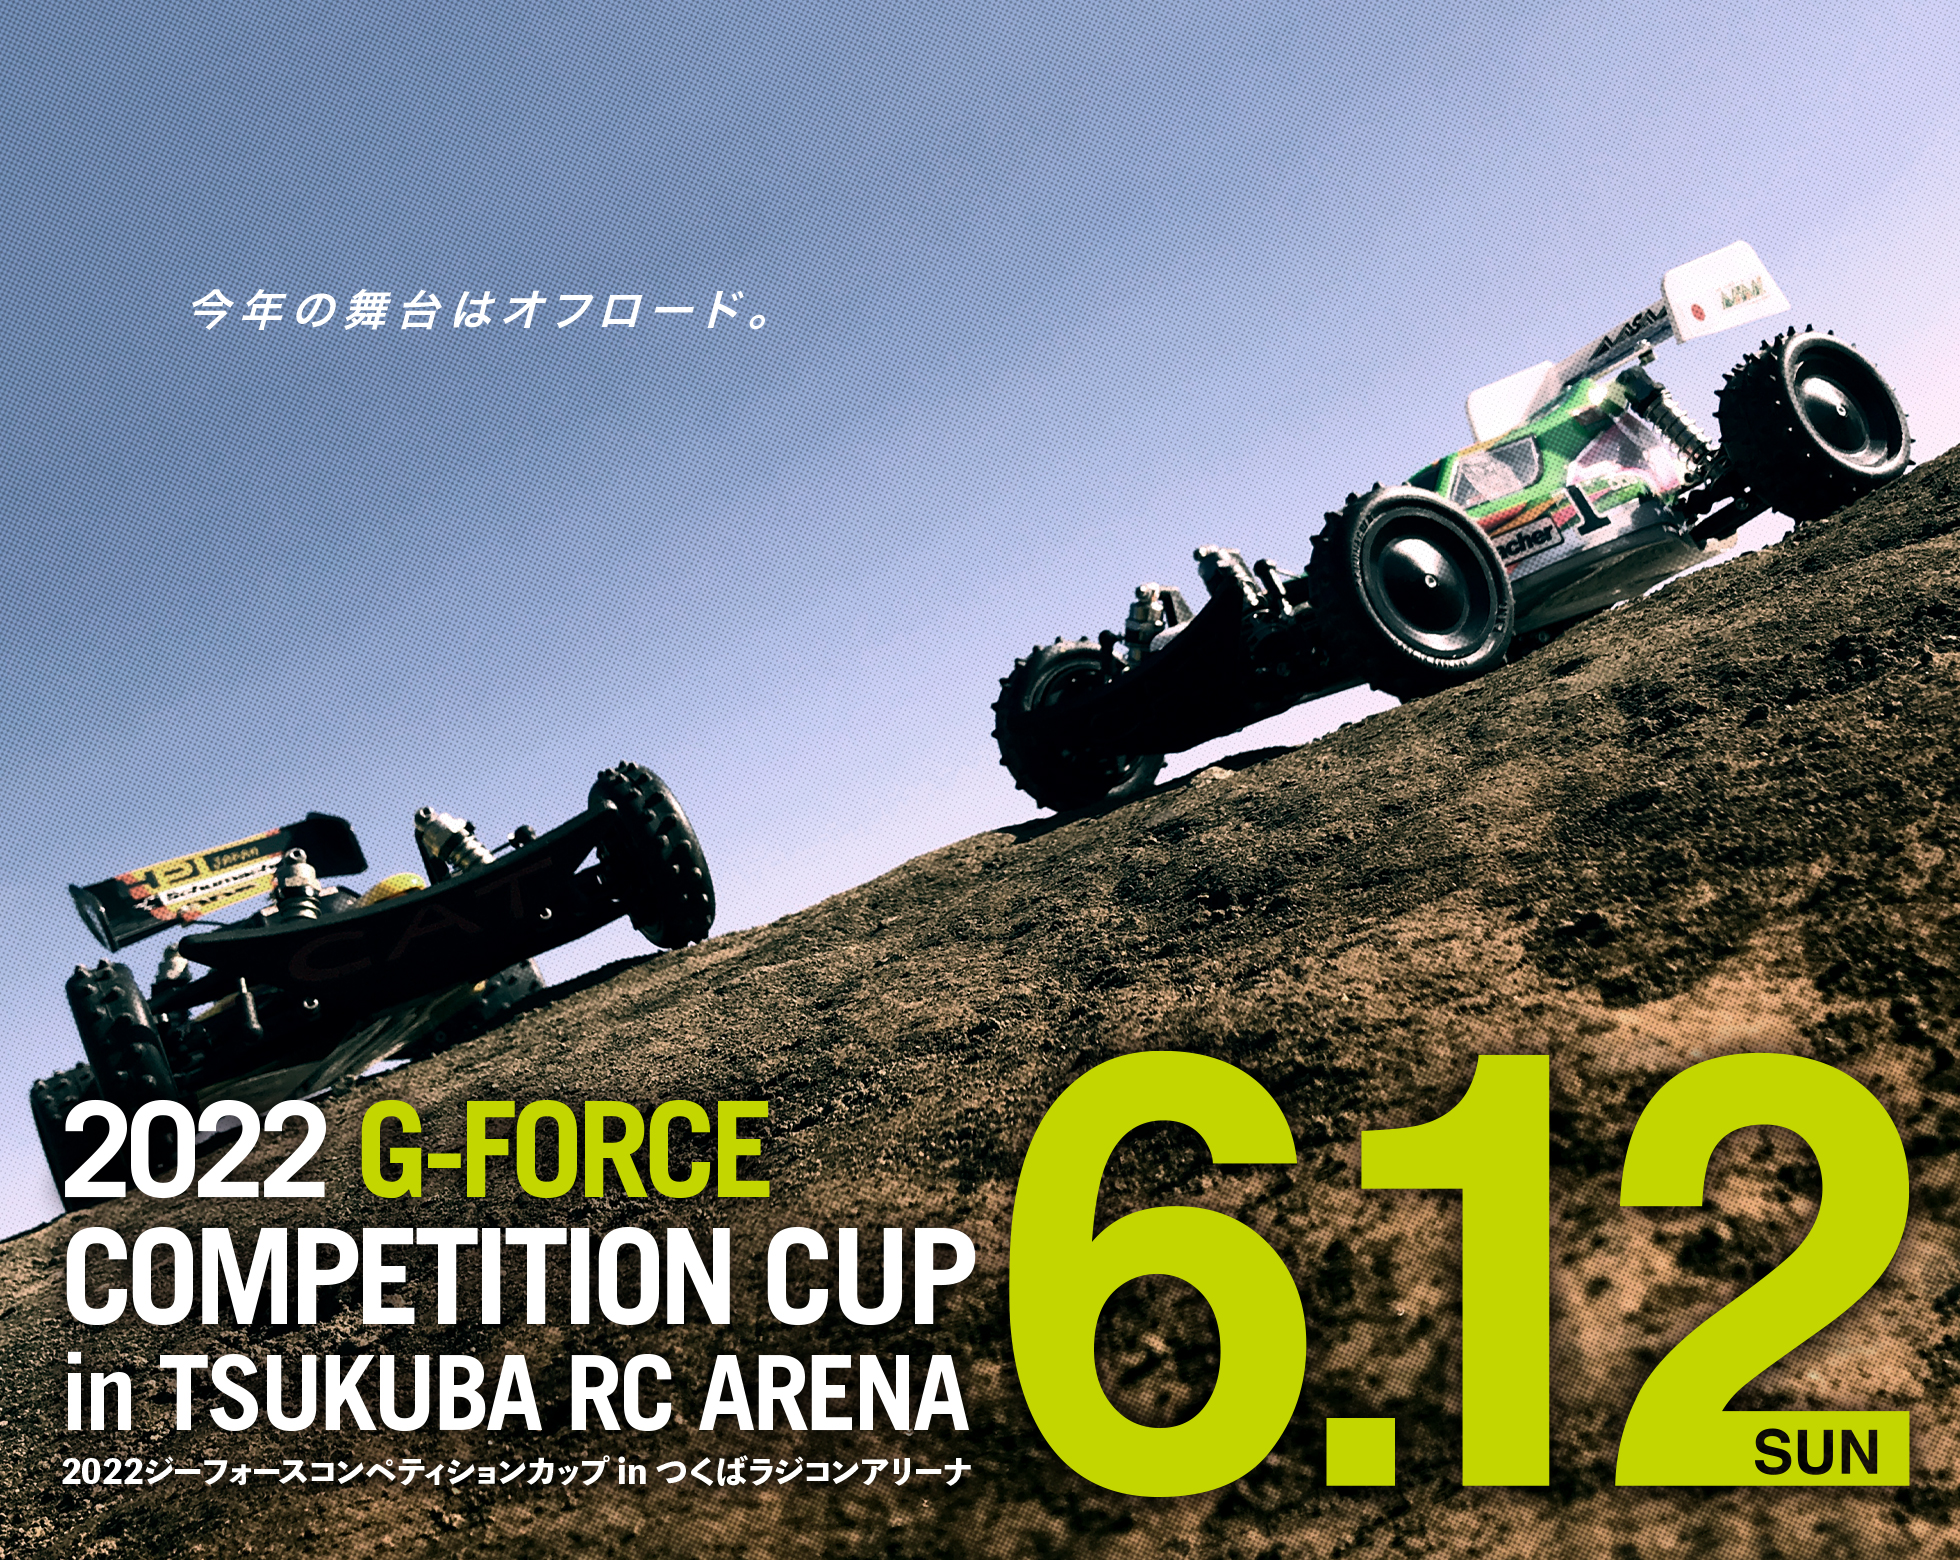 2022 G-FORCE COMPETITION CUP in TSUKUBA RC ARENA